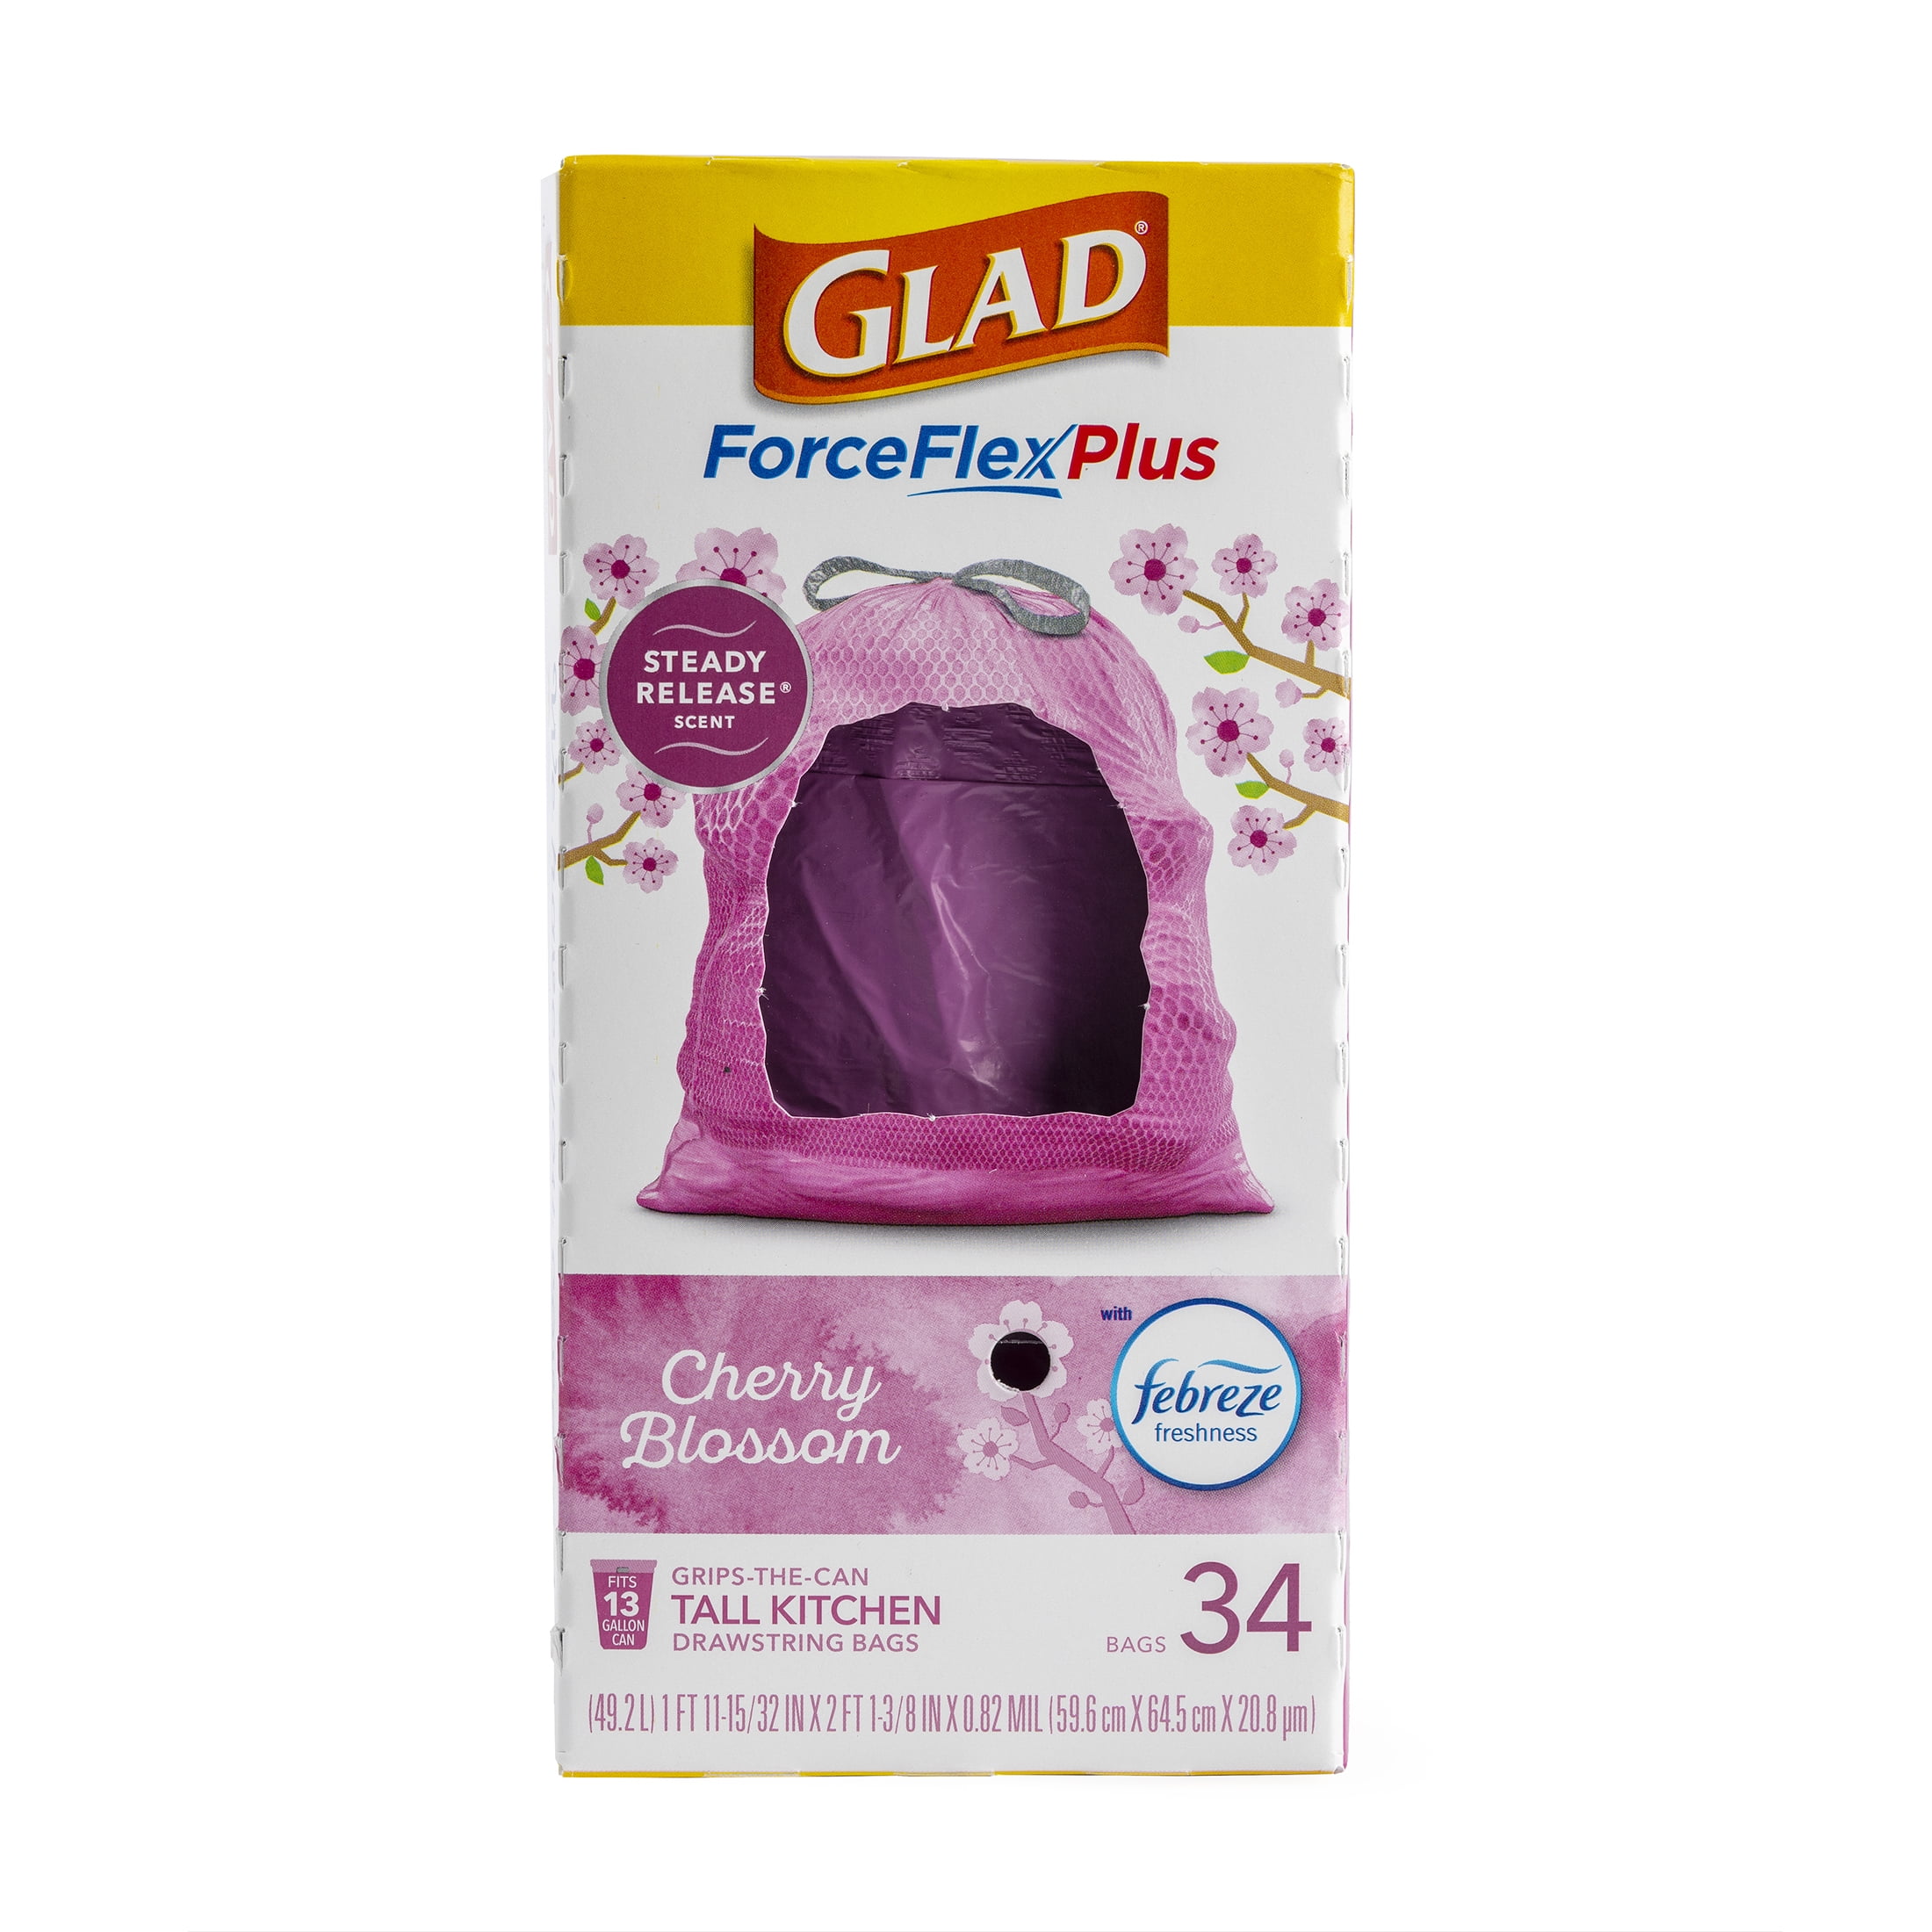 Reviews for Glad ForceFlex MaxStrength 13 gal. Cherry Blossom